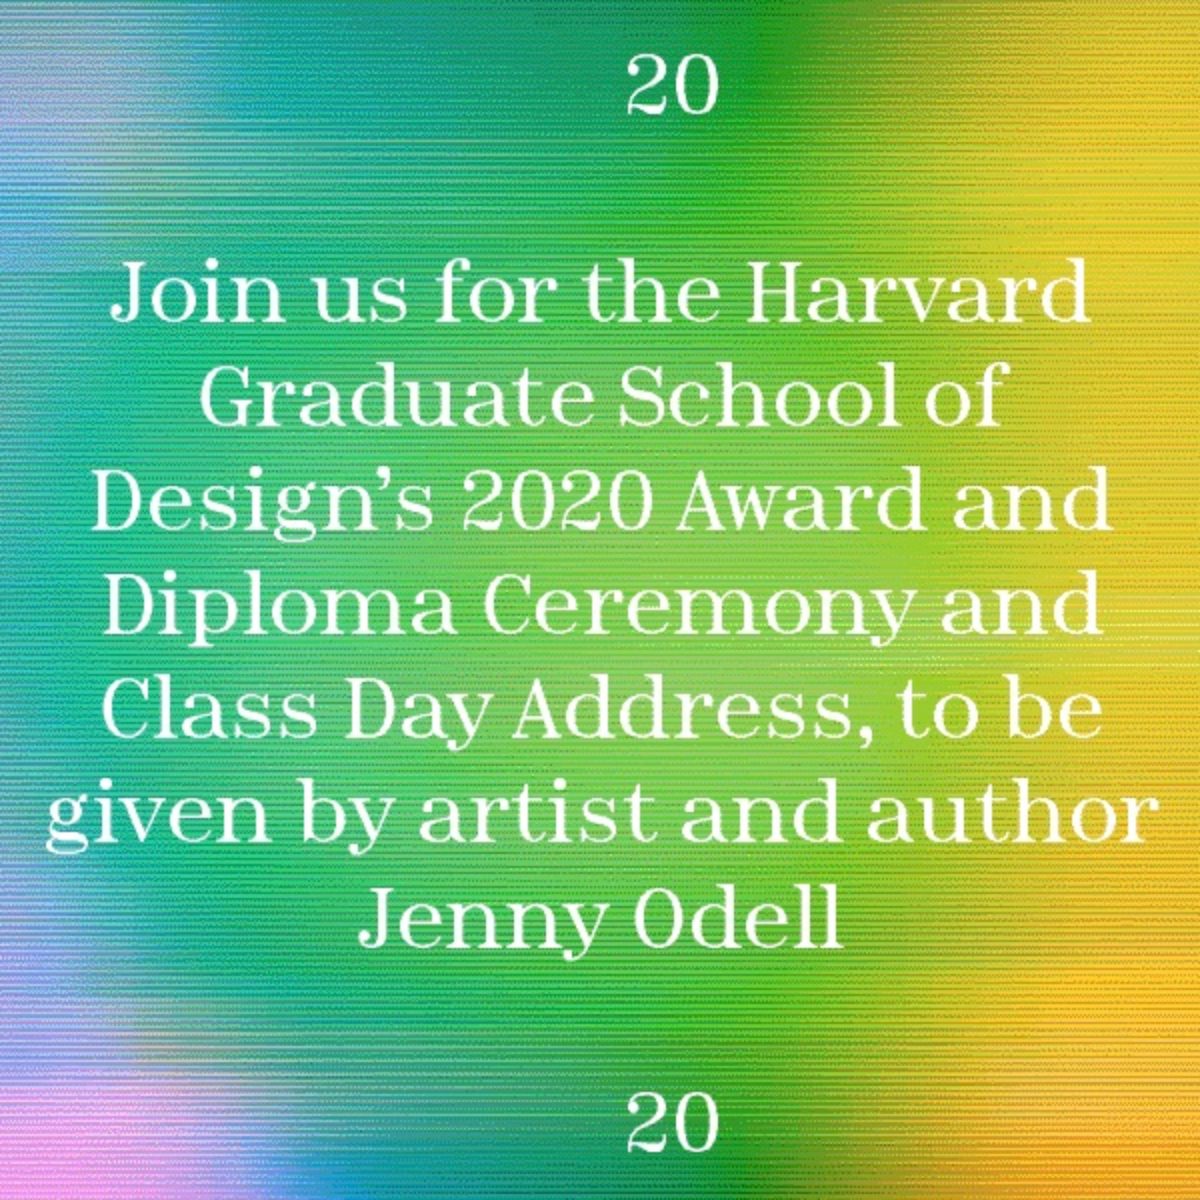 GSD's 2020 Diploma Ceremony and Class Day Address to be given by artist and author Jenny Odell